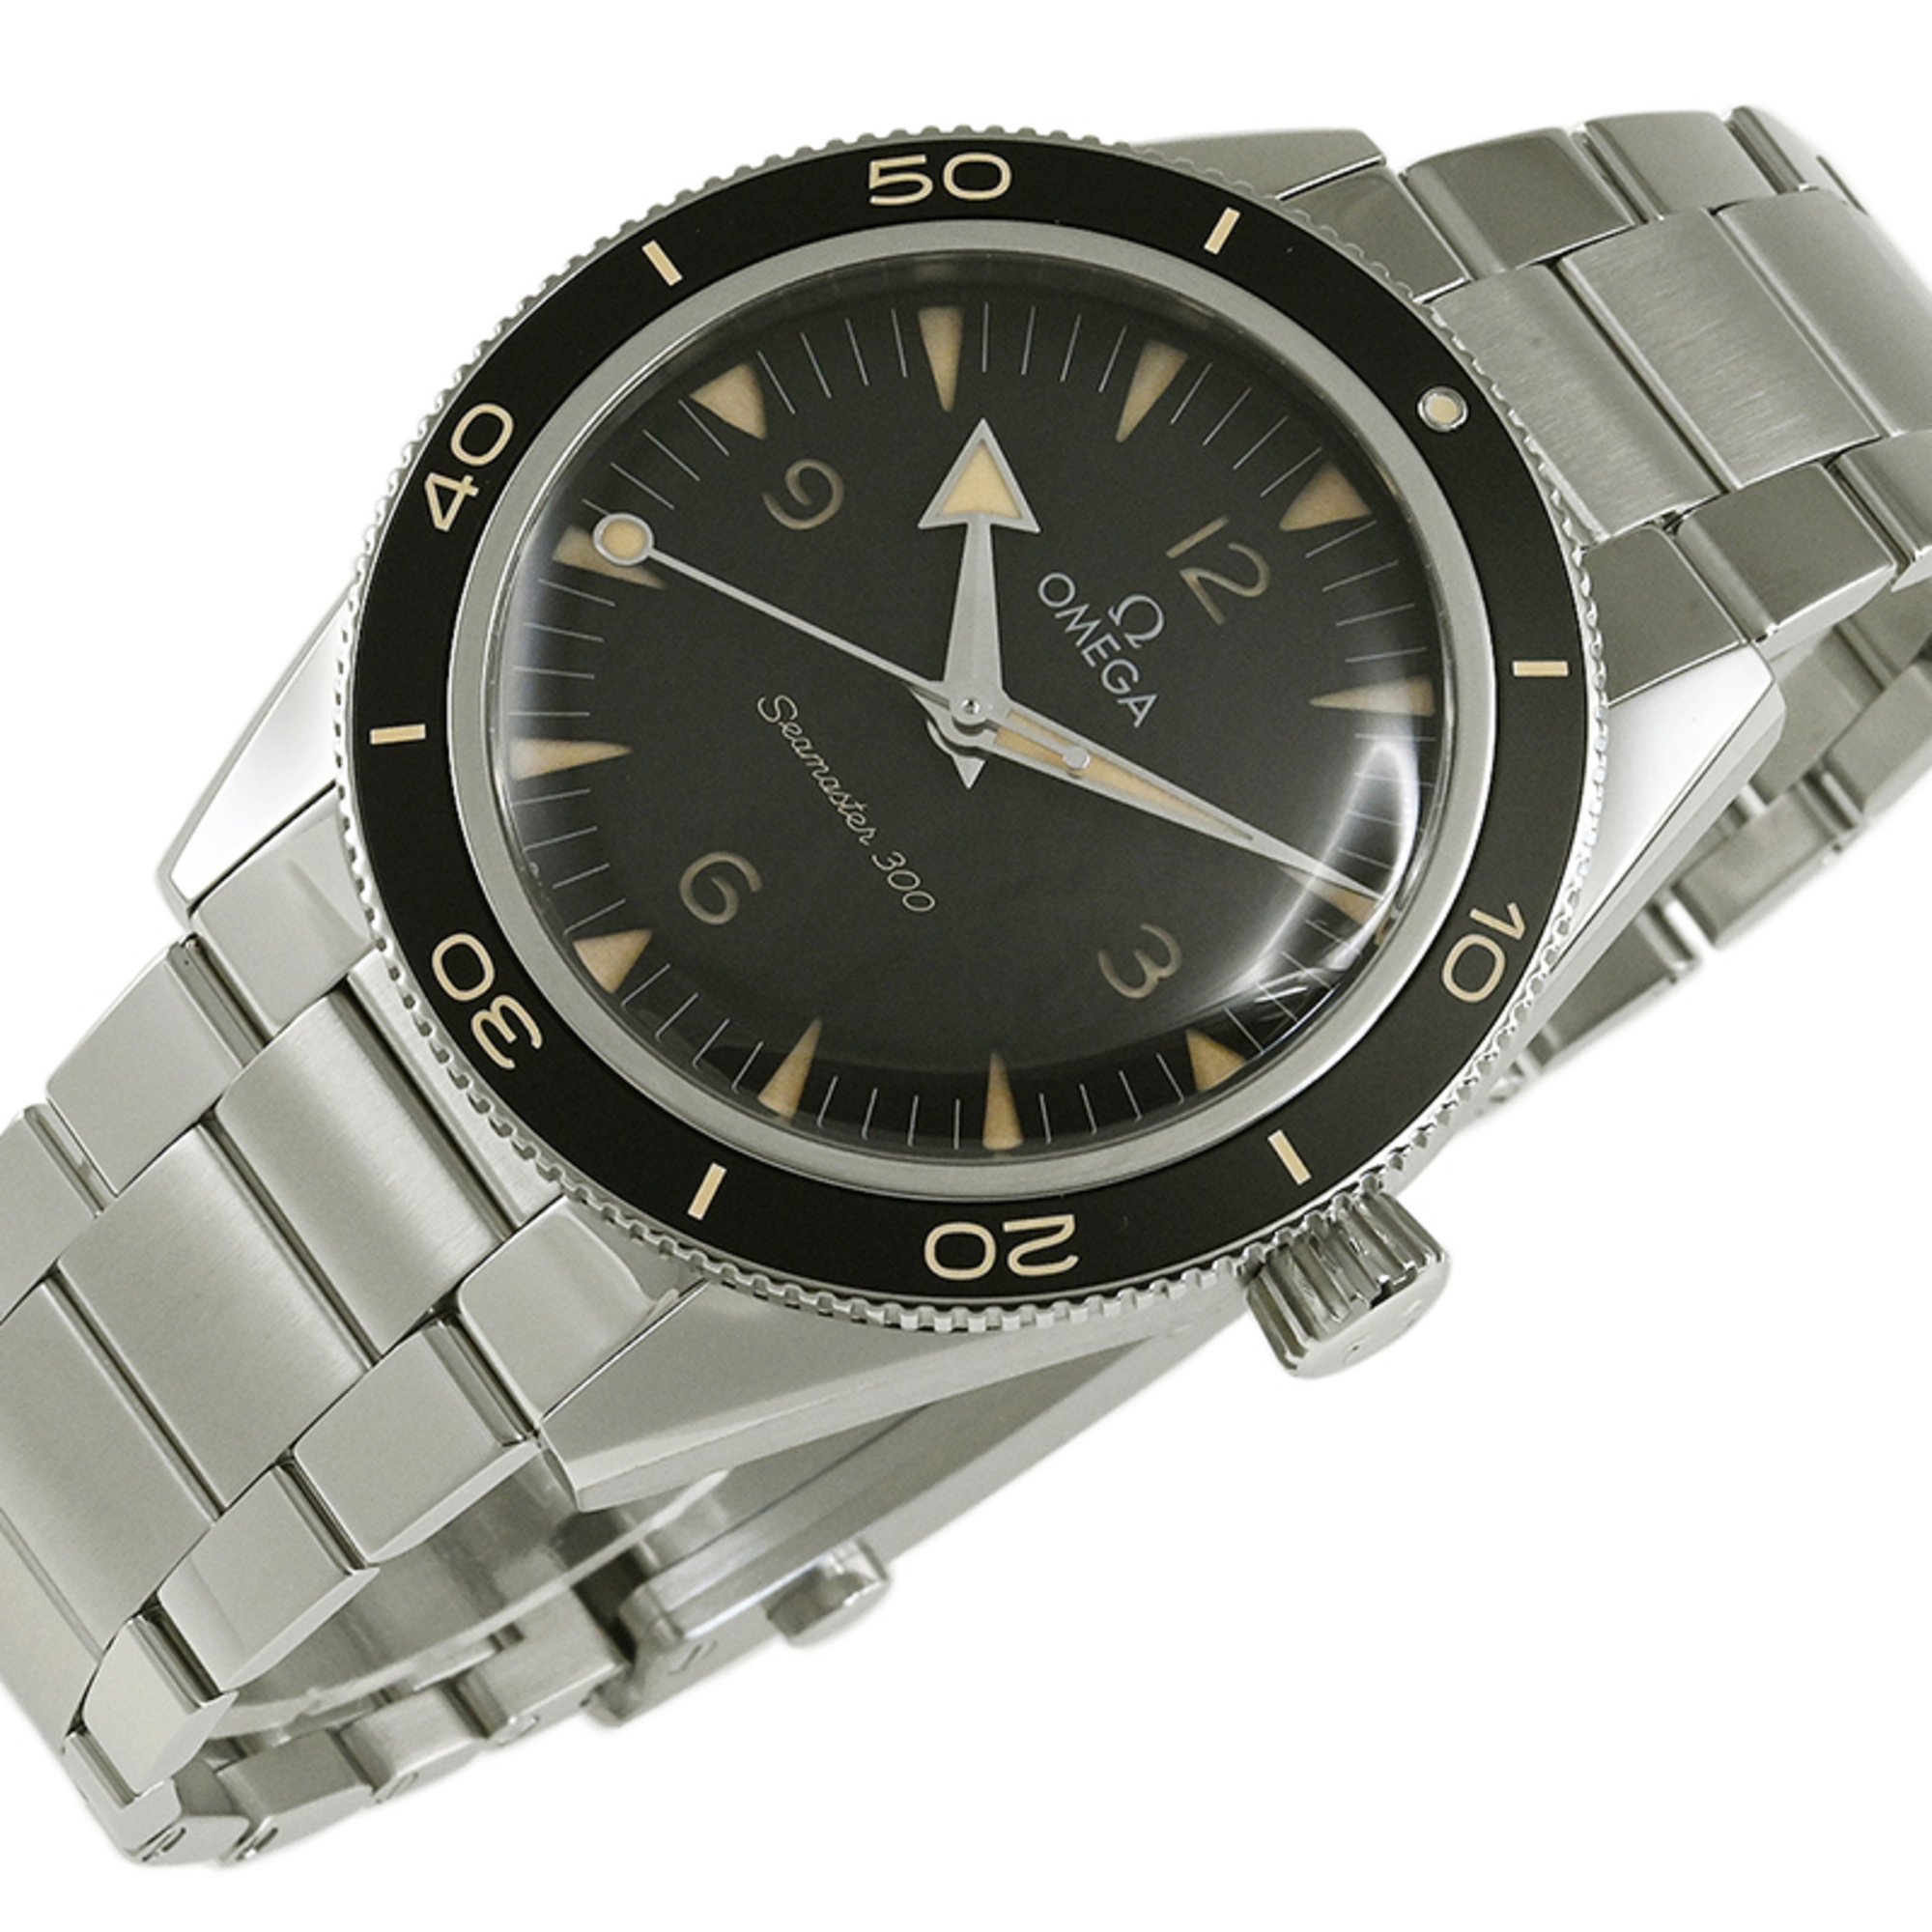 OMEGA Seamaster 300 Master Co-Axial Chronometer 41MM Watch 234.30.41.21.01.001